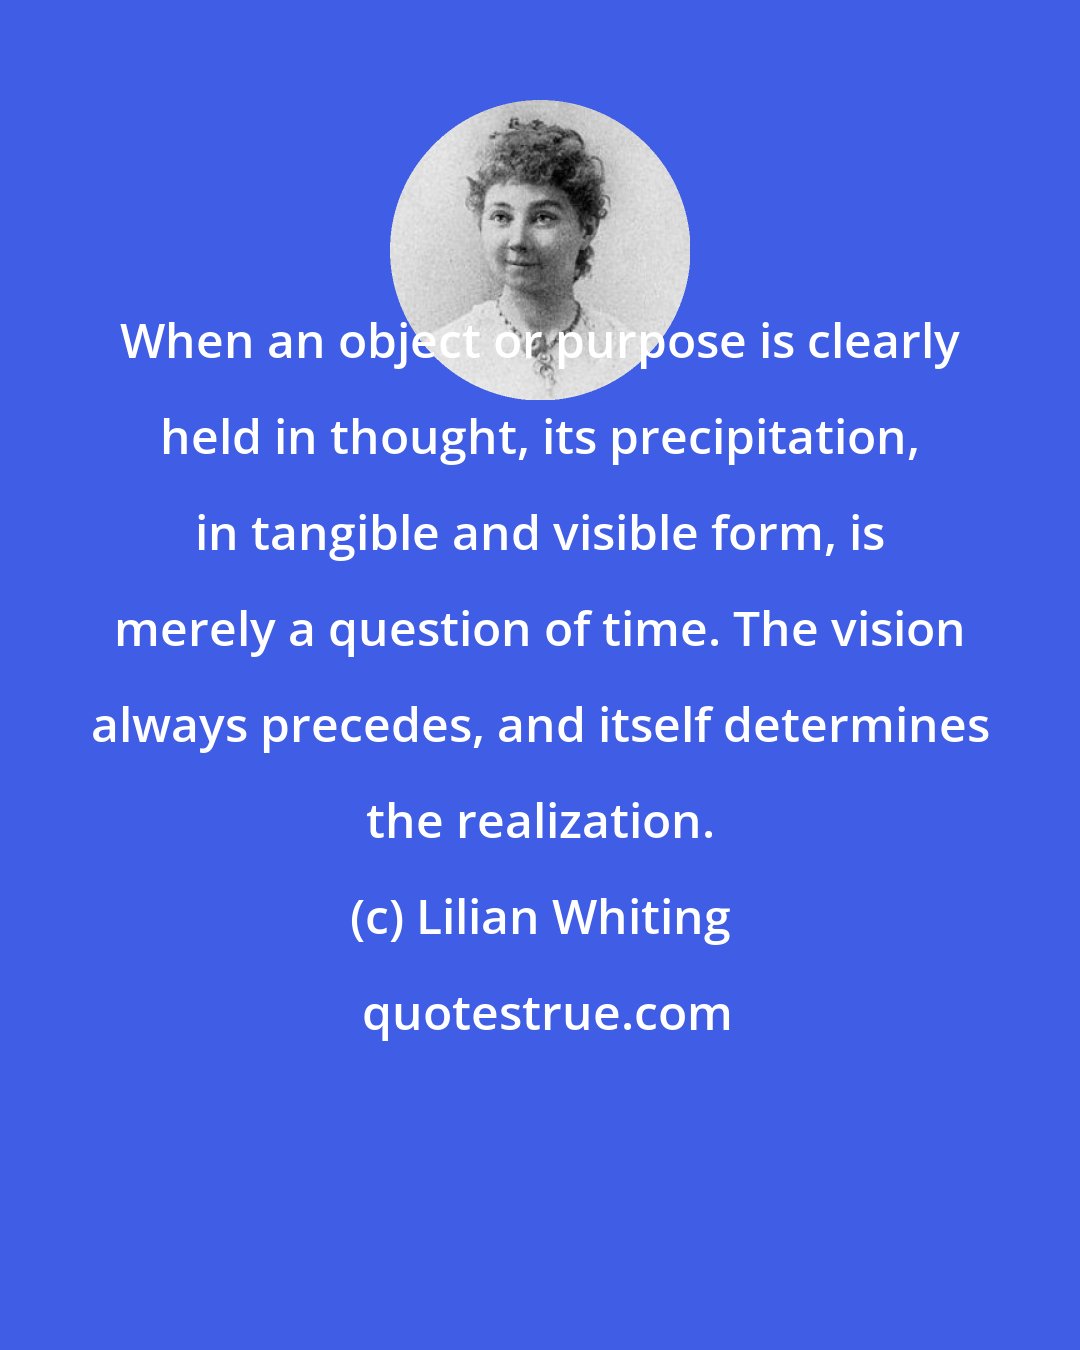 Lilian Whiting: When an object or purpose is clearly held in thought, its precipitation, in tangible and visible form, is merely a question of time. The vision always precedes, and itself determines the realization.